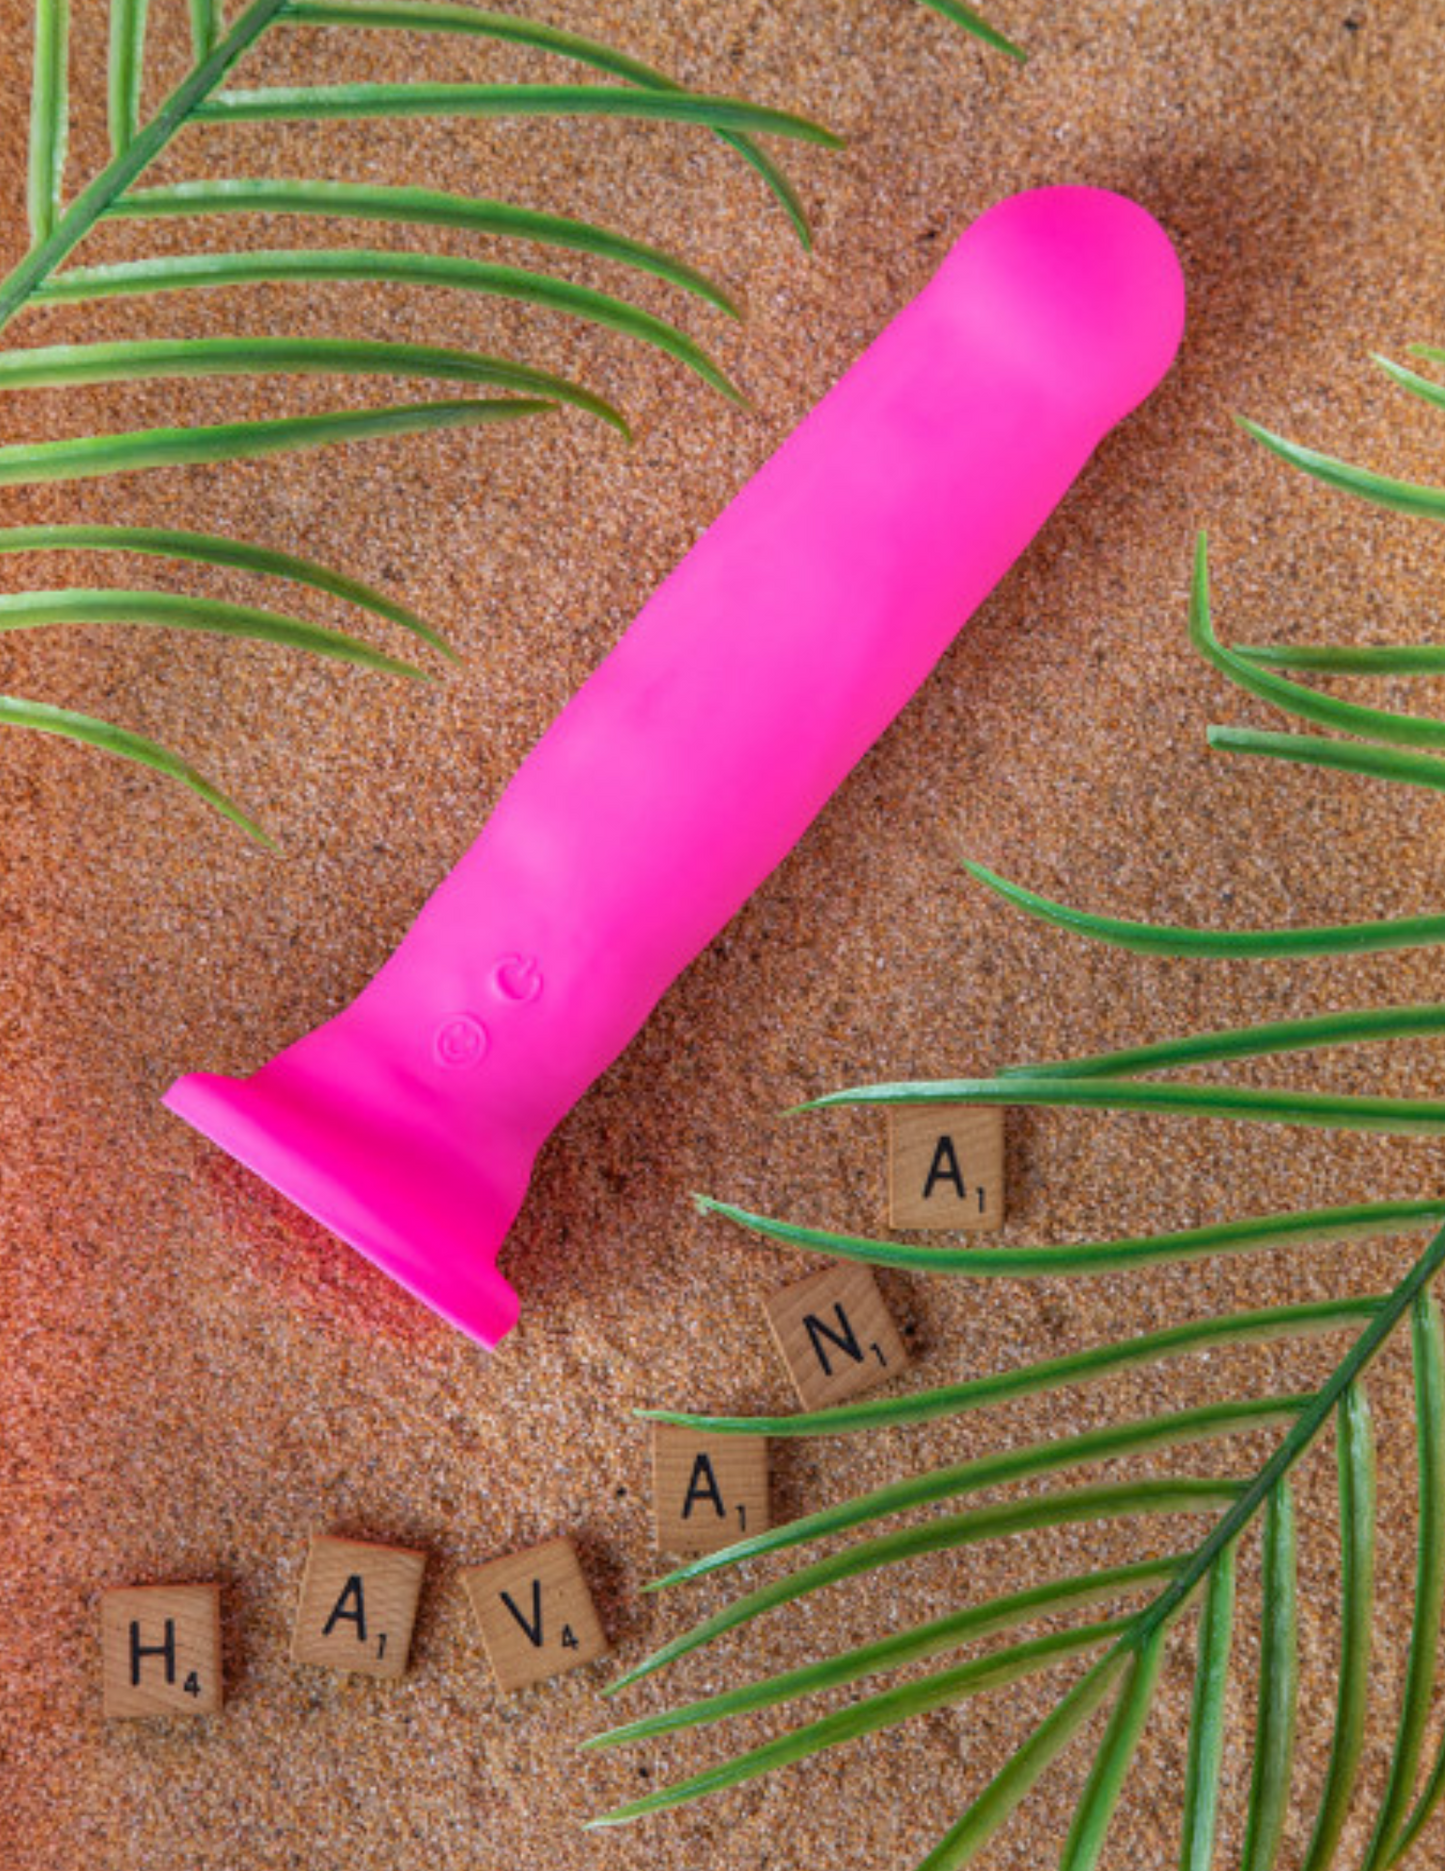 Ad for the Havana Impressions Vibrator from Blush (pink).